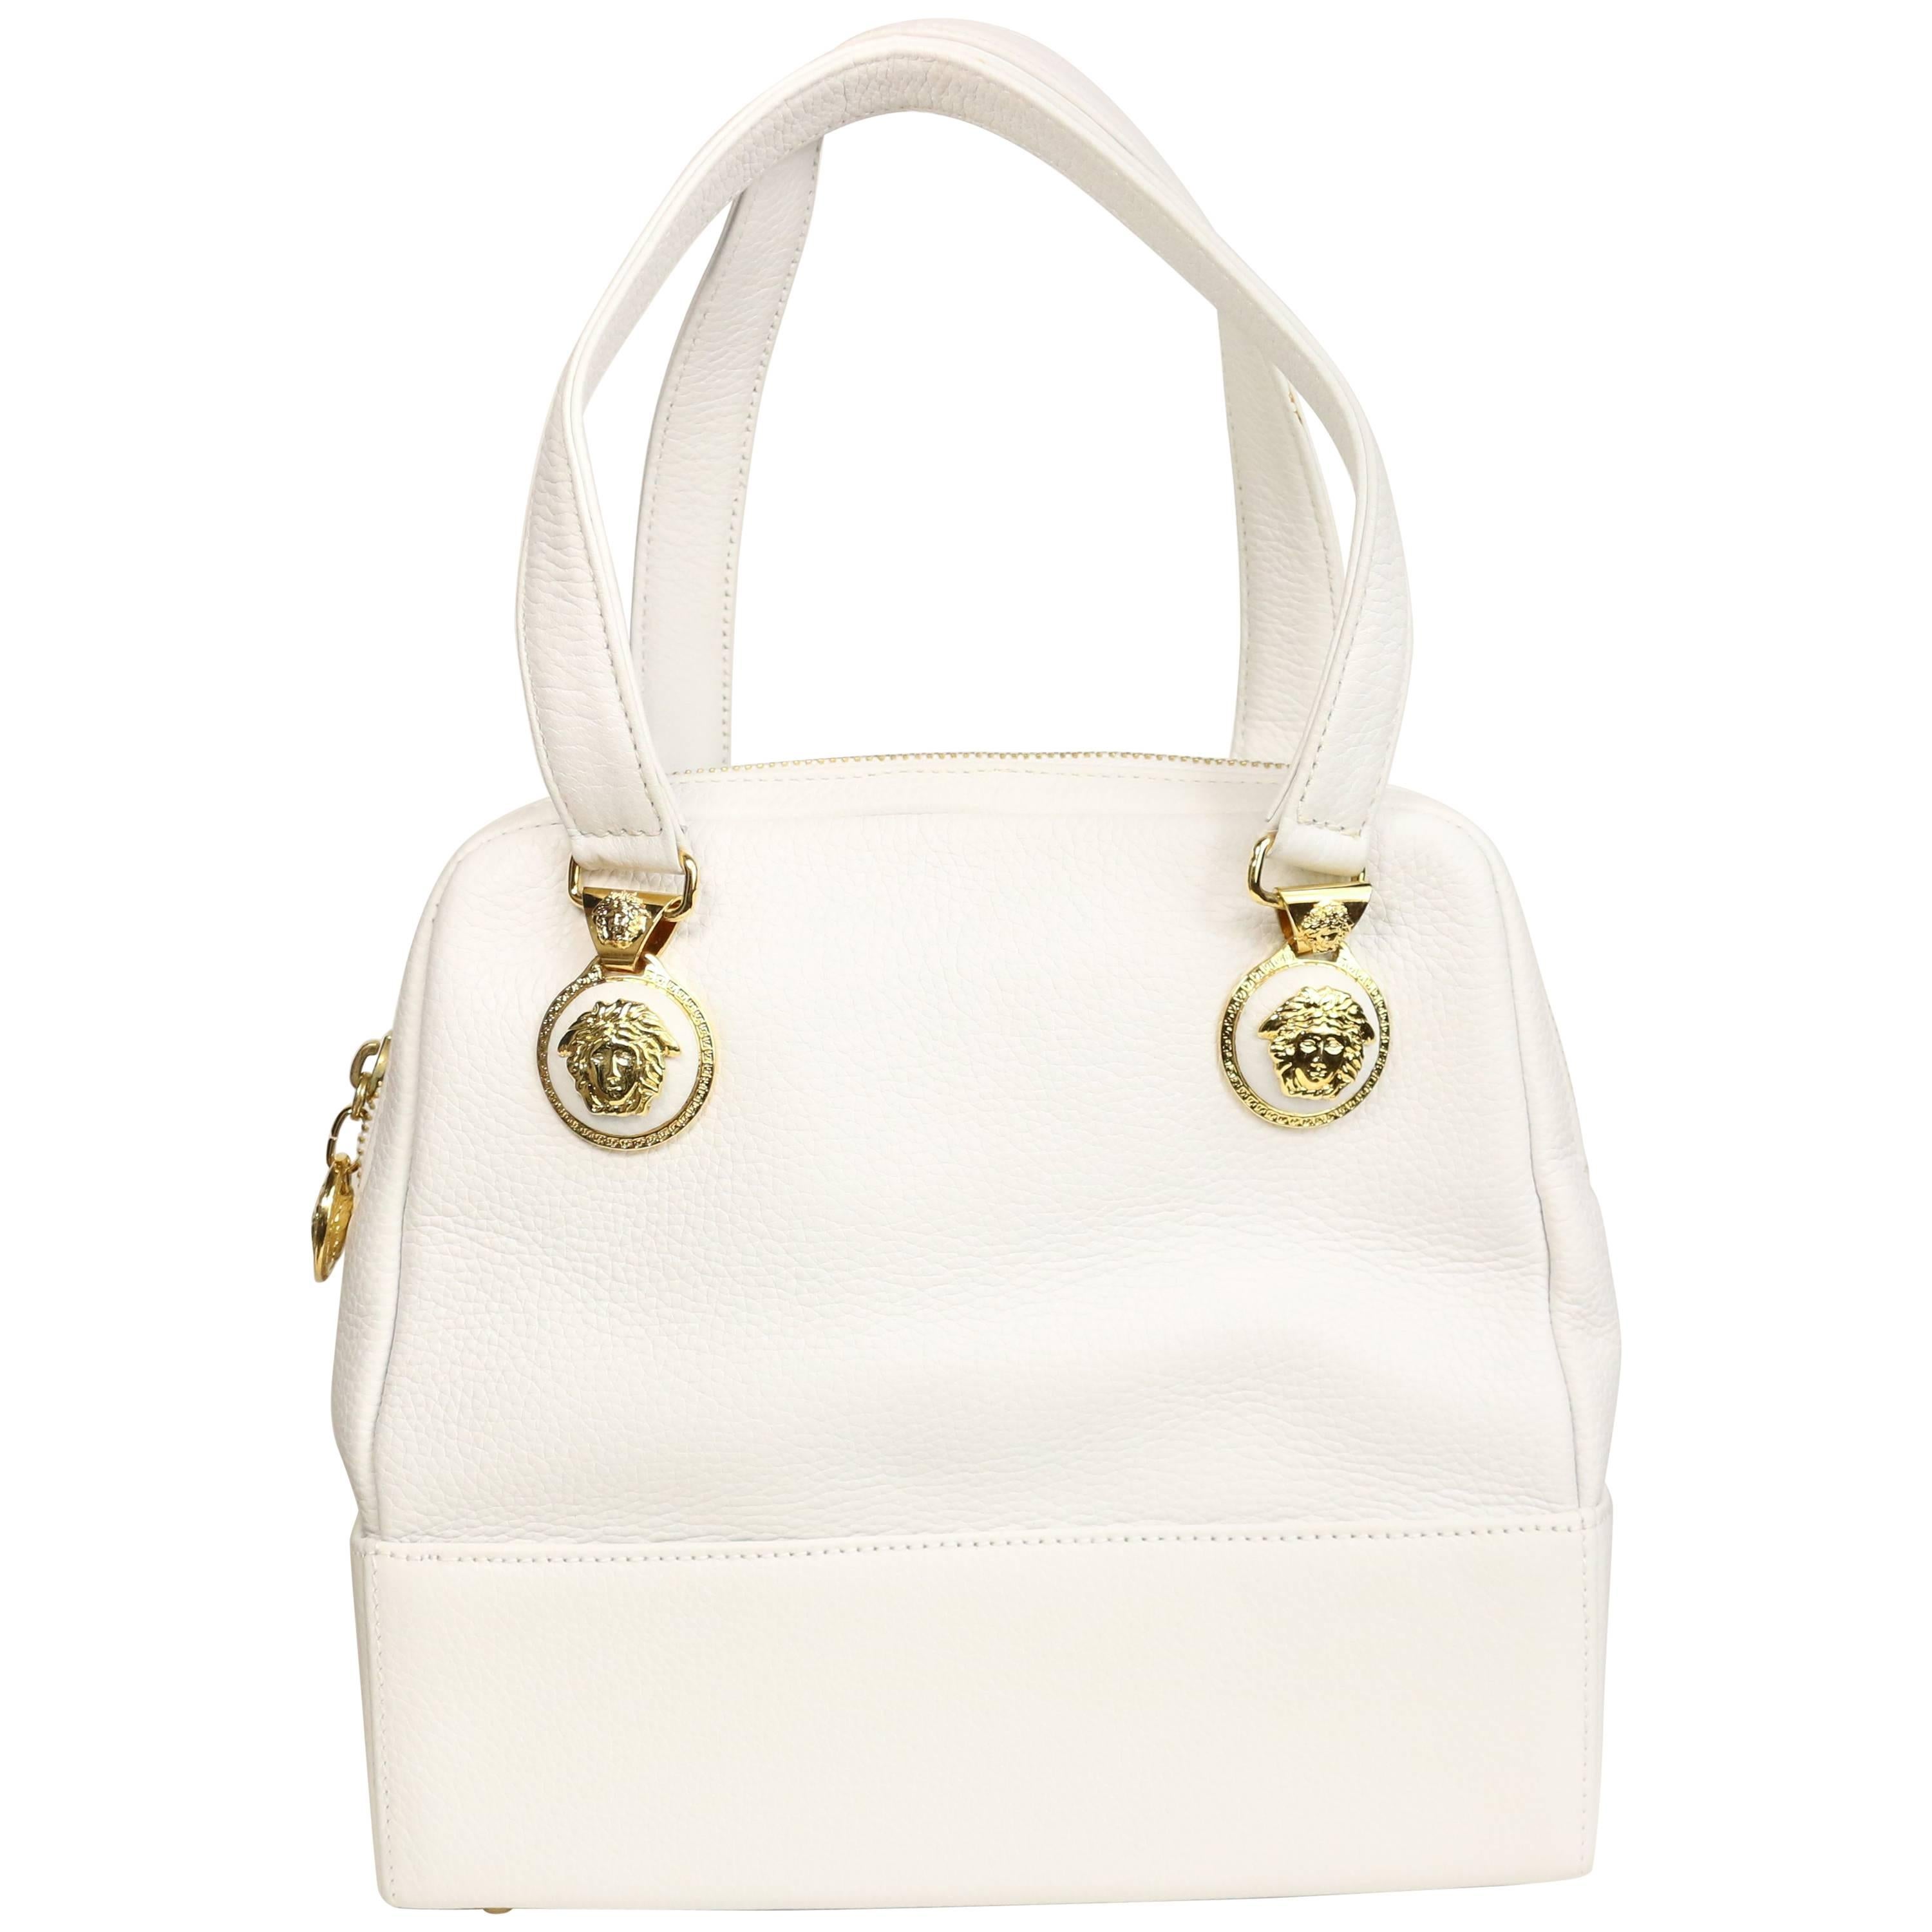 90s Gianni Versace Couture White Leather  Handbag For Sale